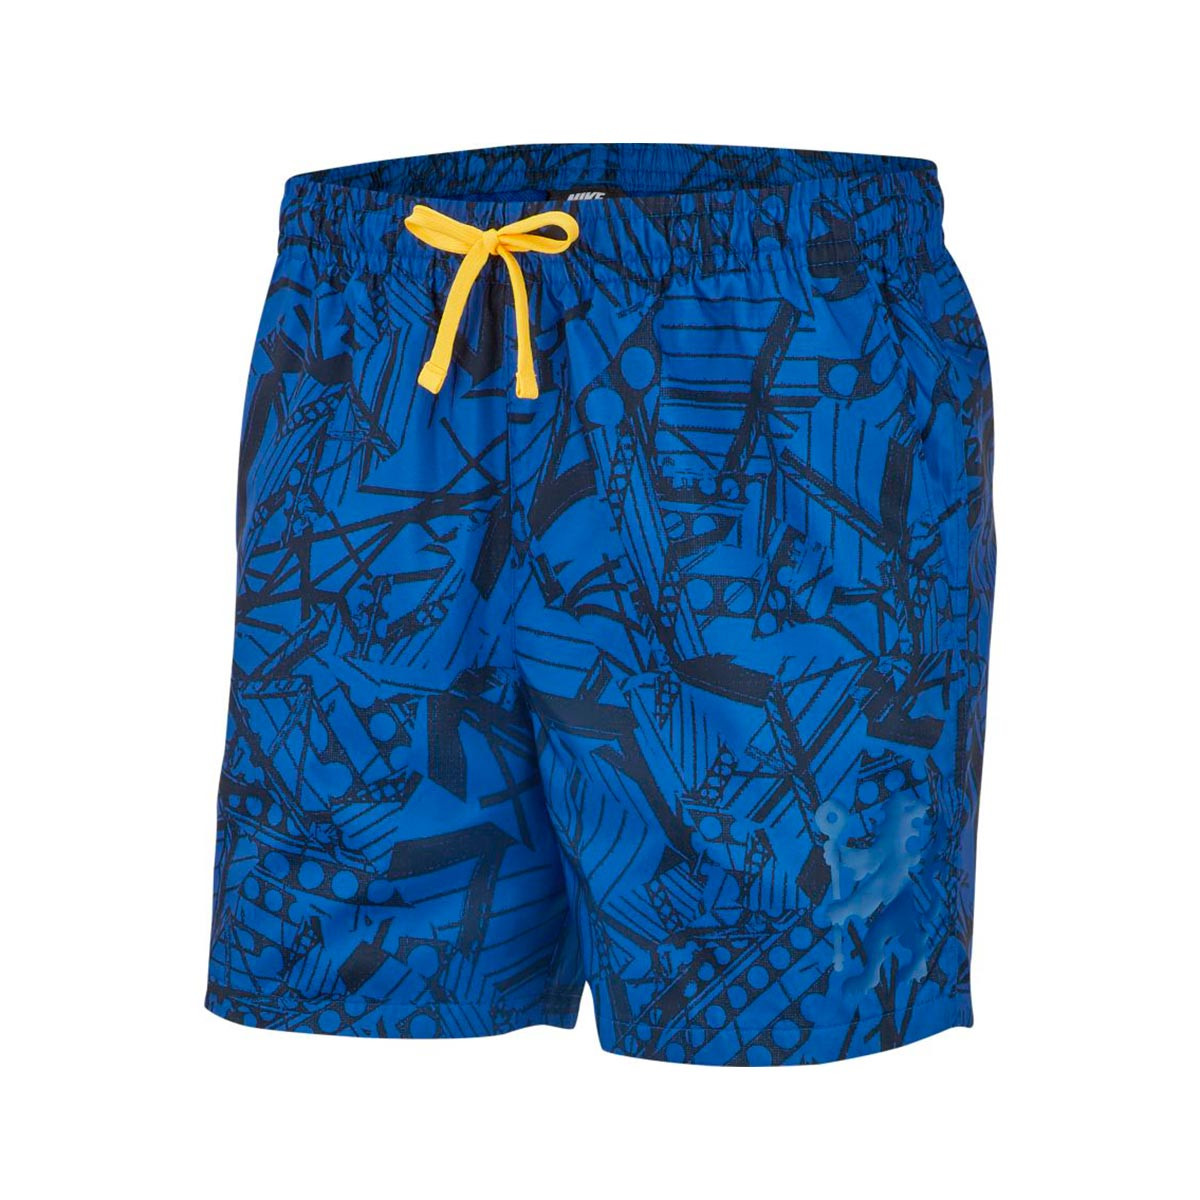 nsw all over print shorts